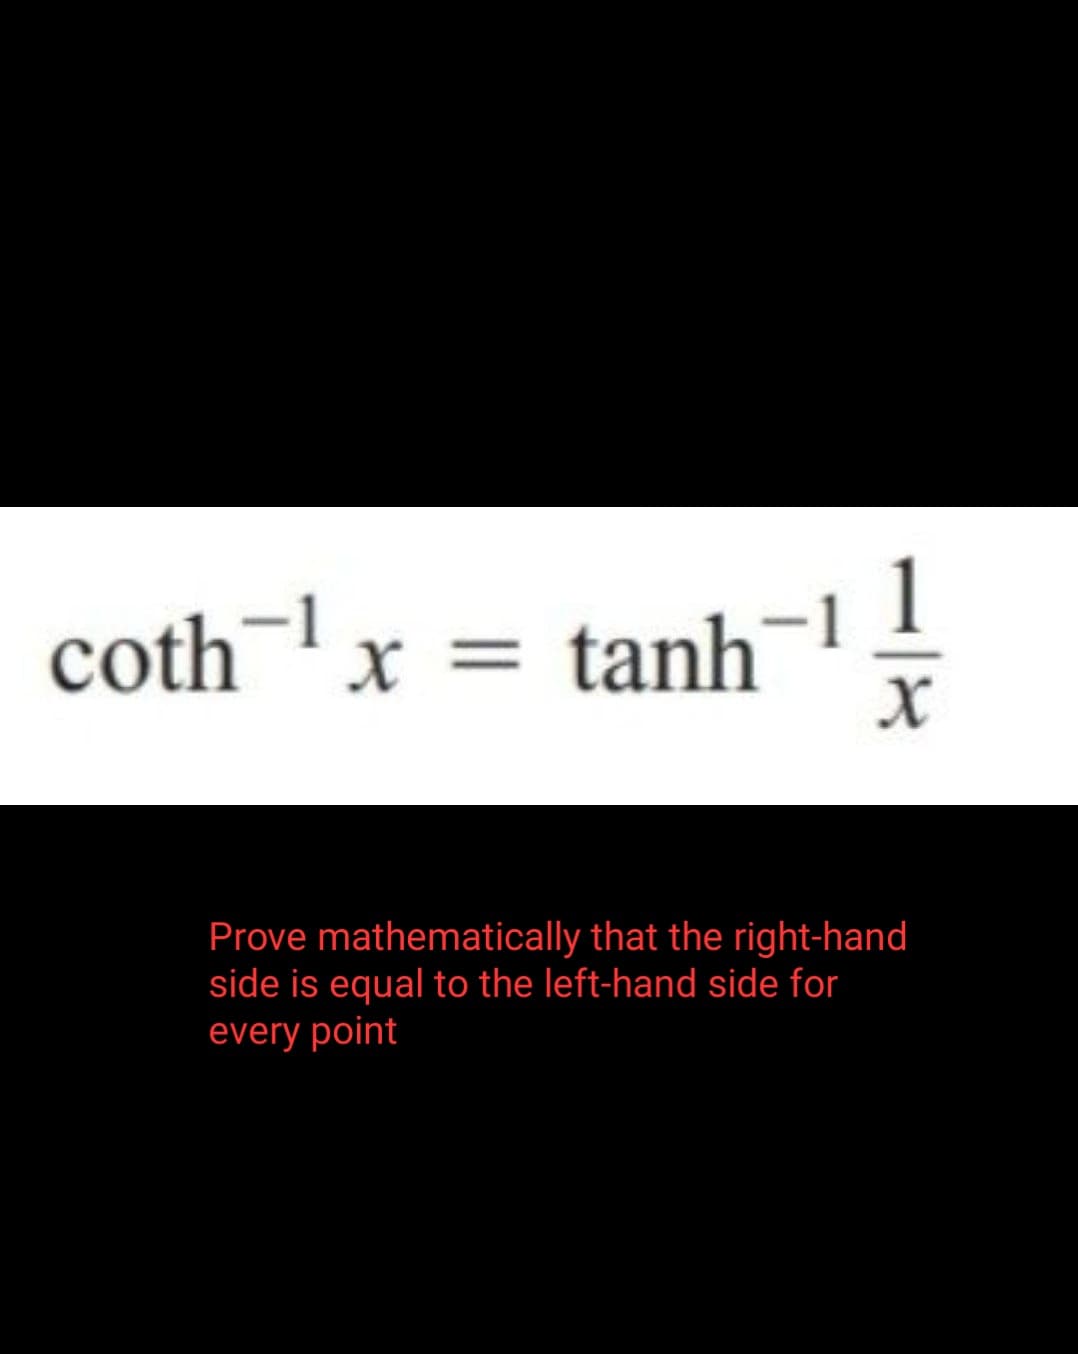 coth-1 x = tanh
1 x
1
x
Prove mathematically that the right-hand
side is equal to the left-hand side for
every point